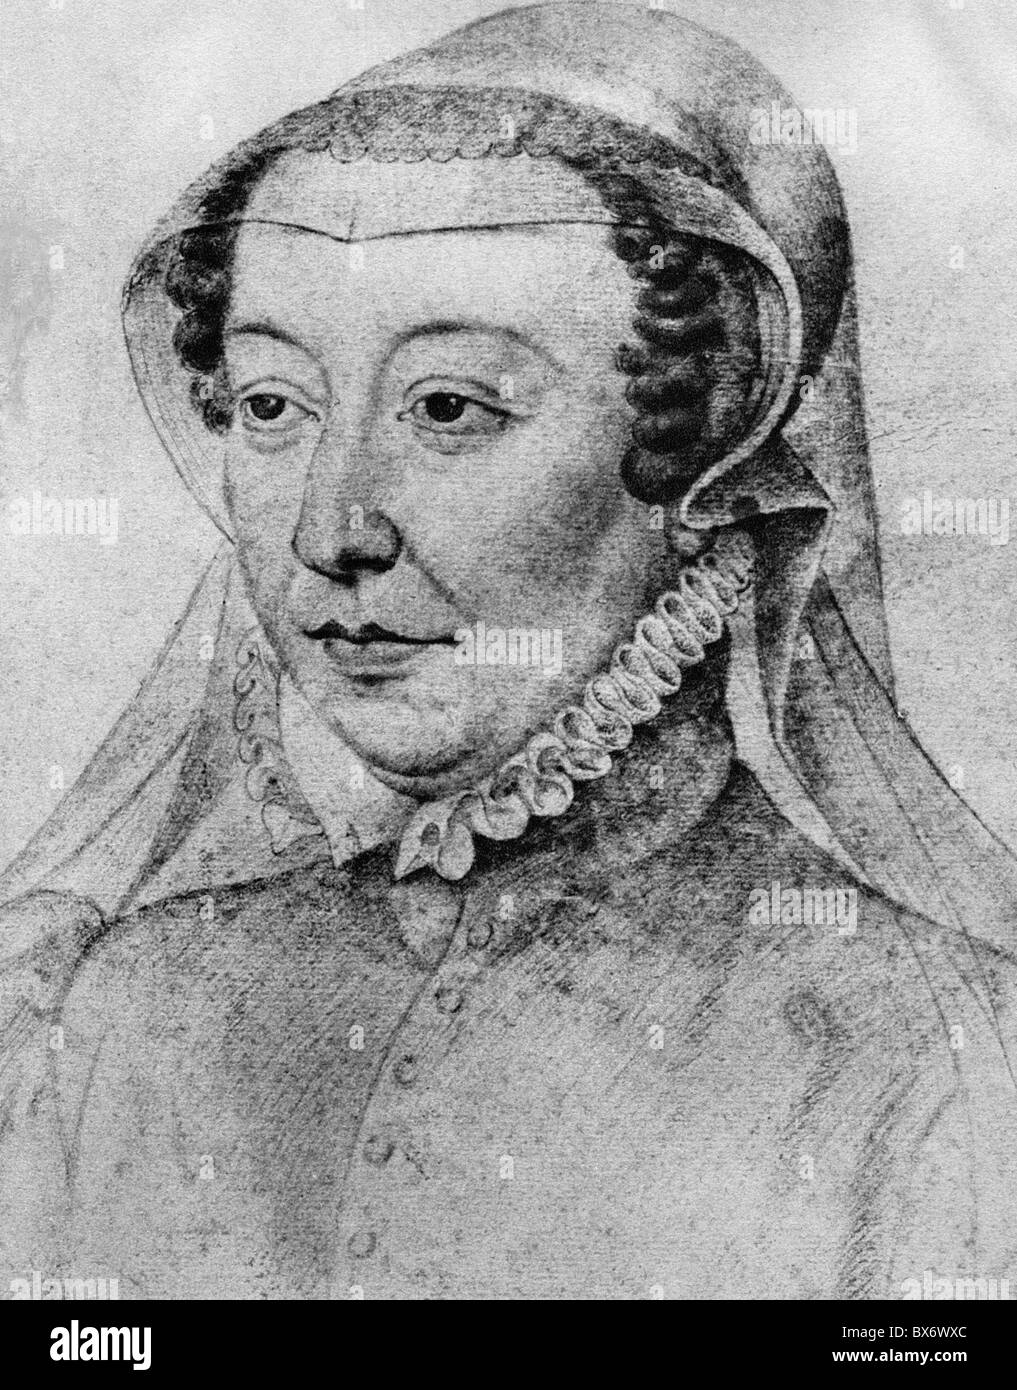 Catherine di Medici, 13.4.1519 - 5.1.1589, Queen Consort of France 31.3.1547 - 10.7.1559, portrait, drawing, 1560, , Stock Photo